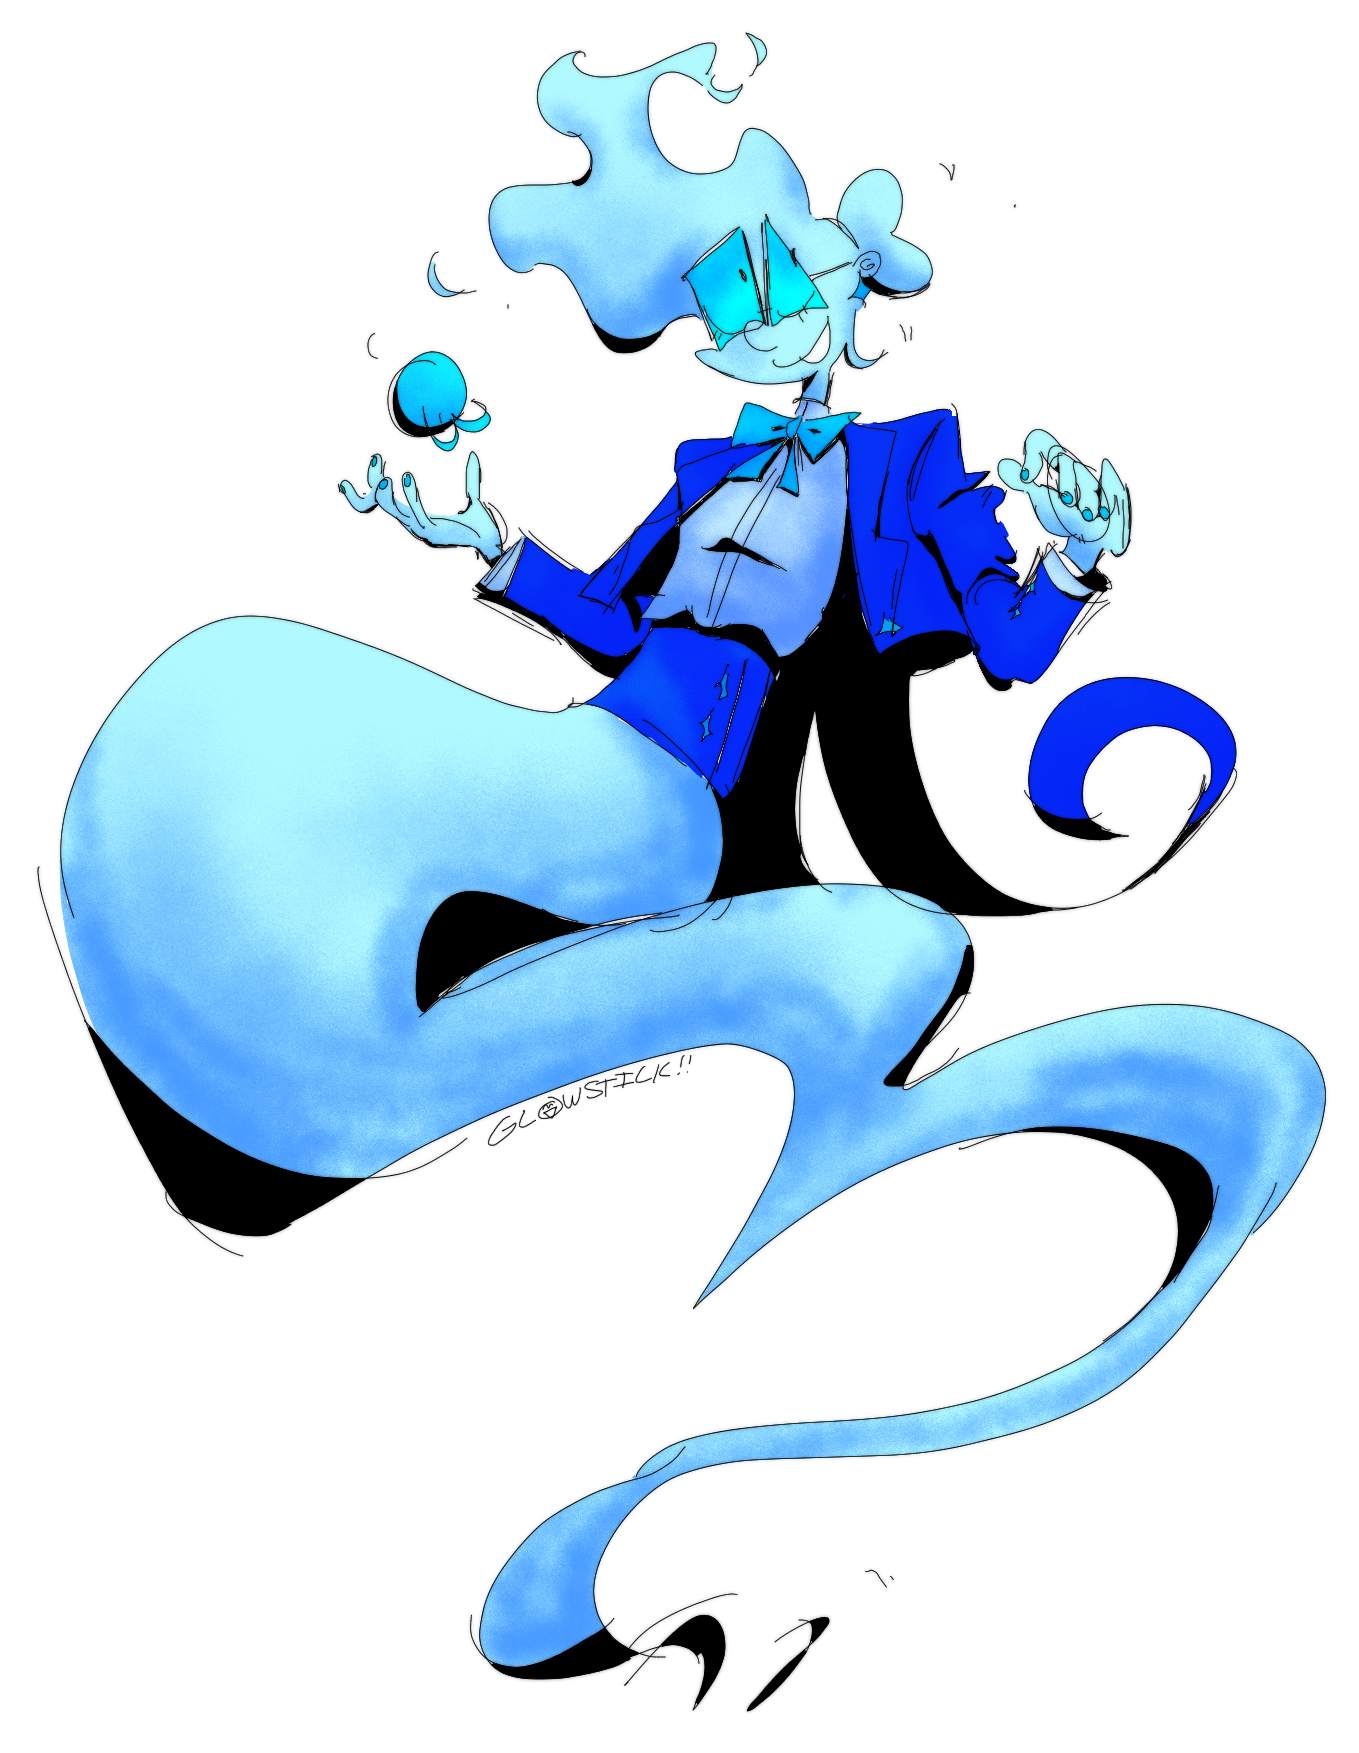 A drawing of a blue ghost girl on a transparent background. She is wearing a tailcoat and blue glasses with one square lens and one triangle lens. She is holding a blue ball of magic in one hand and smiling at the viewer.